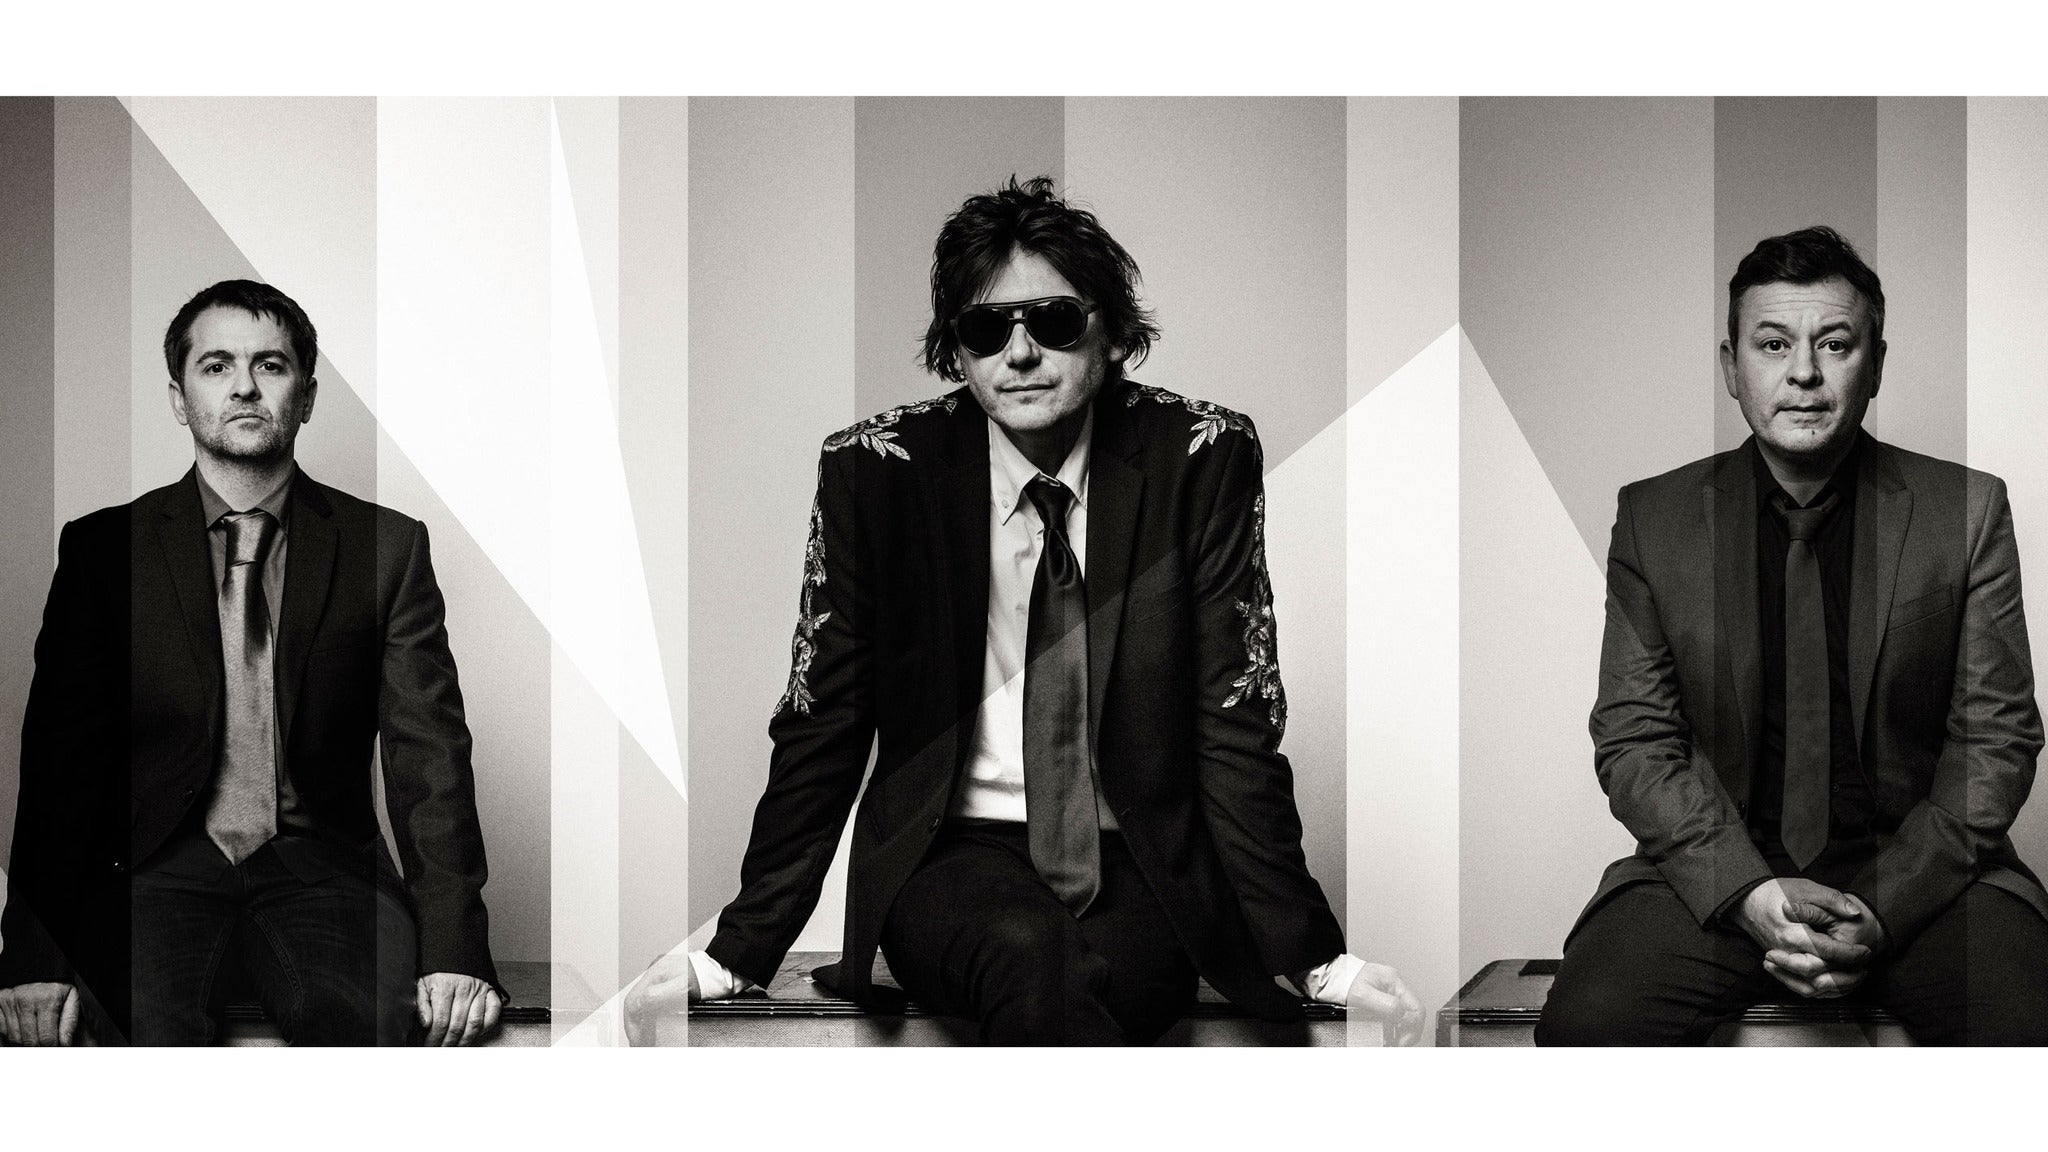 Manic Street Preachers and The London Suede presale code